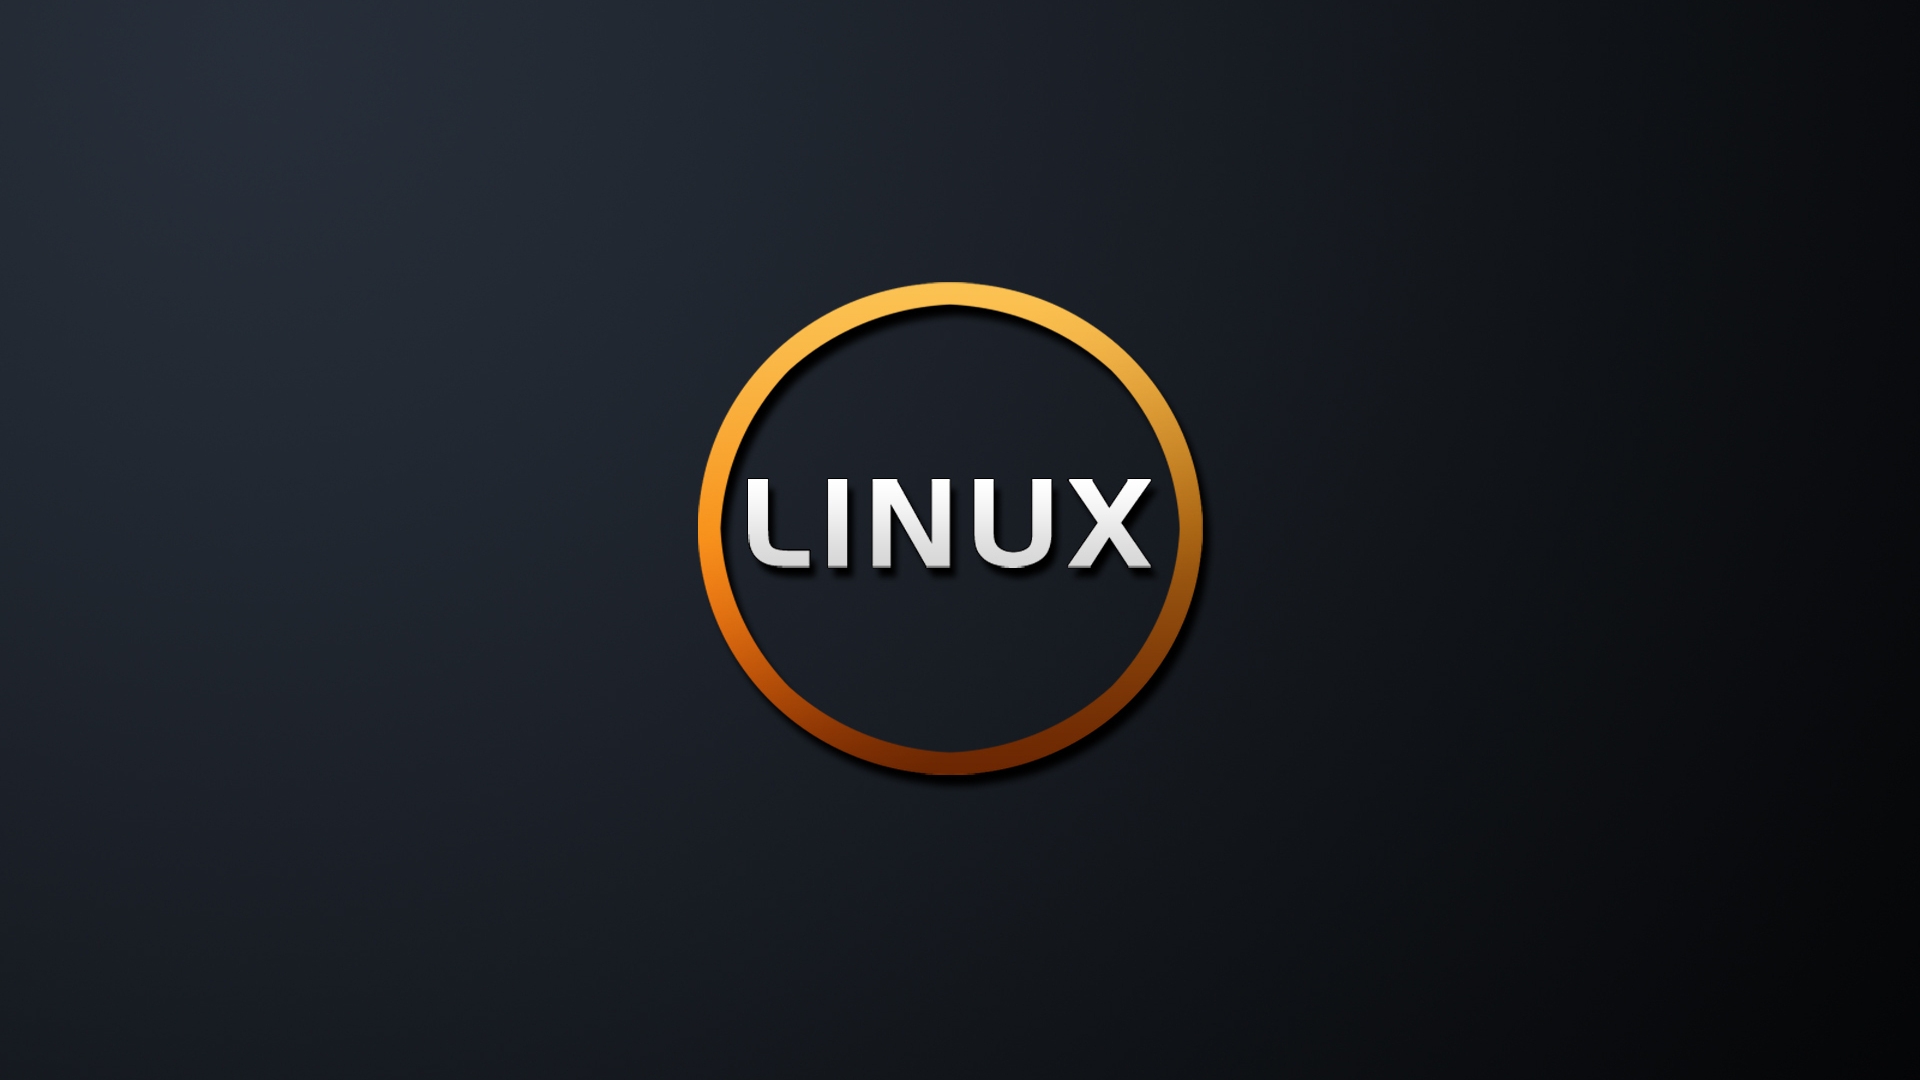 Linux: A Year Full of Milestones